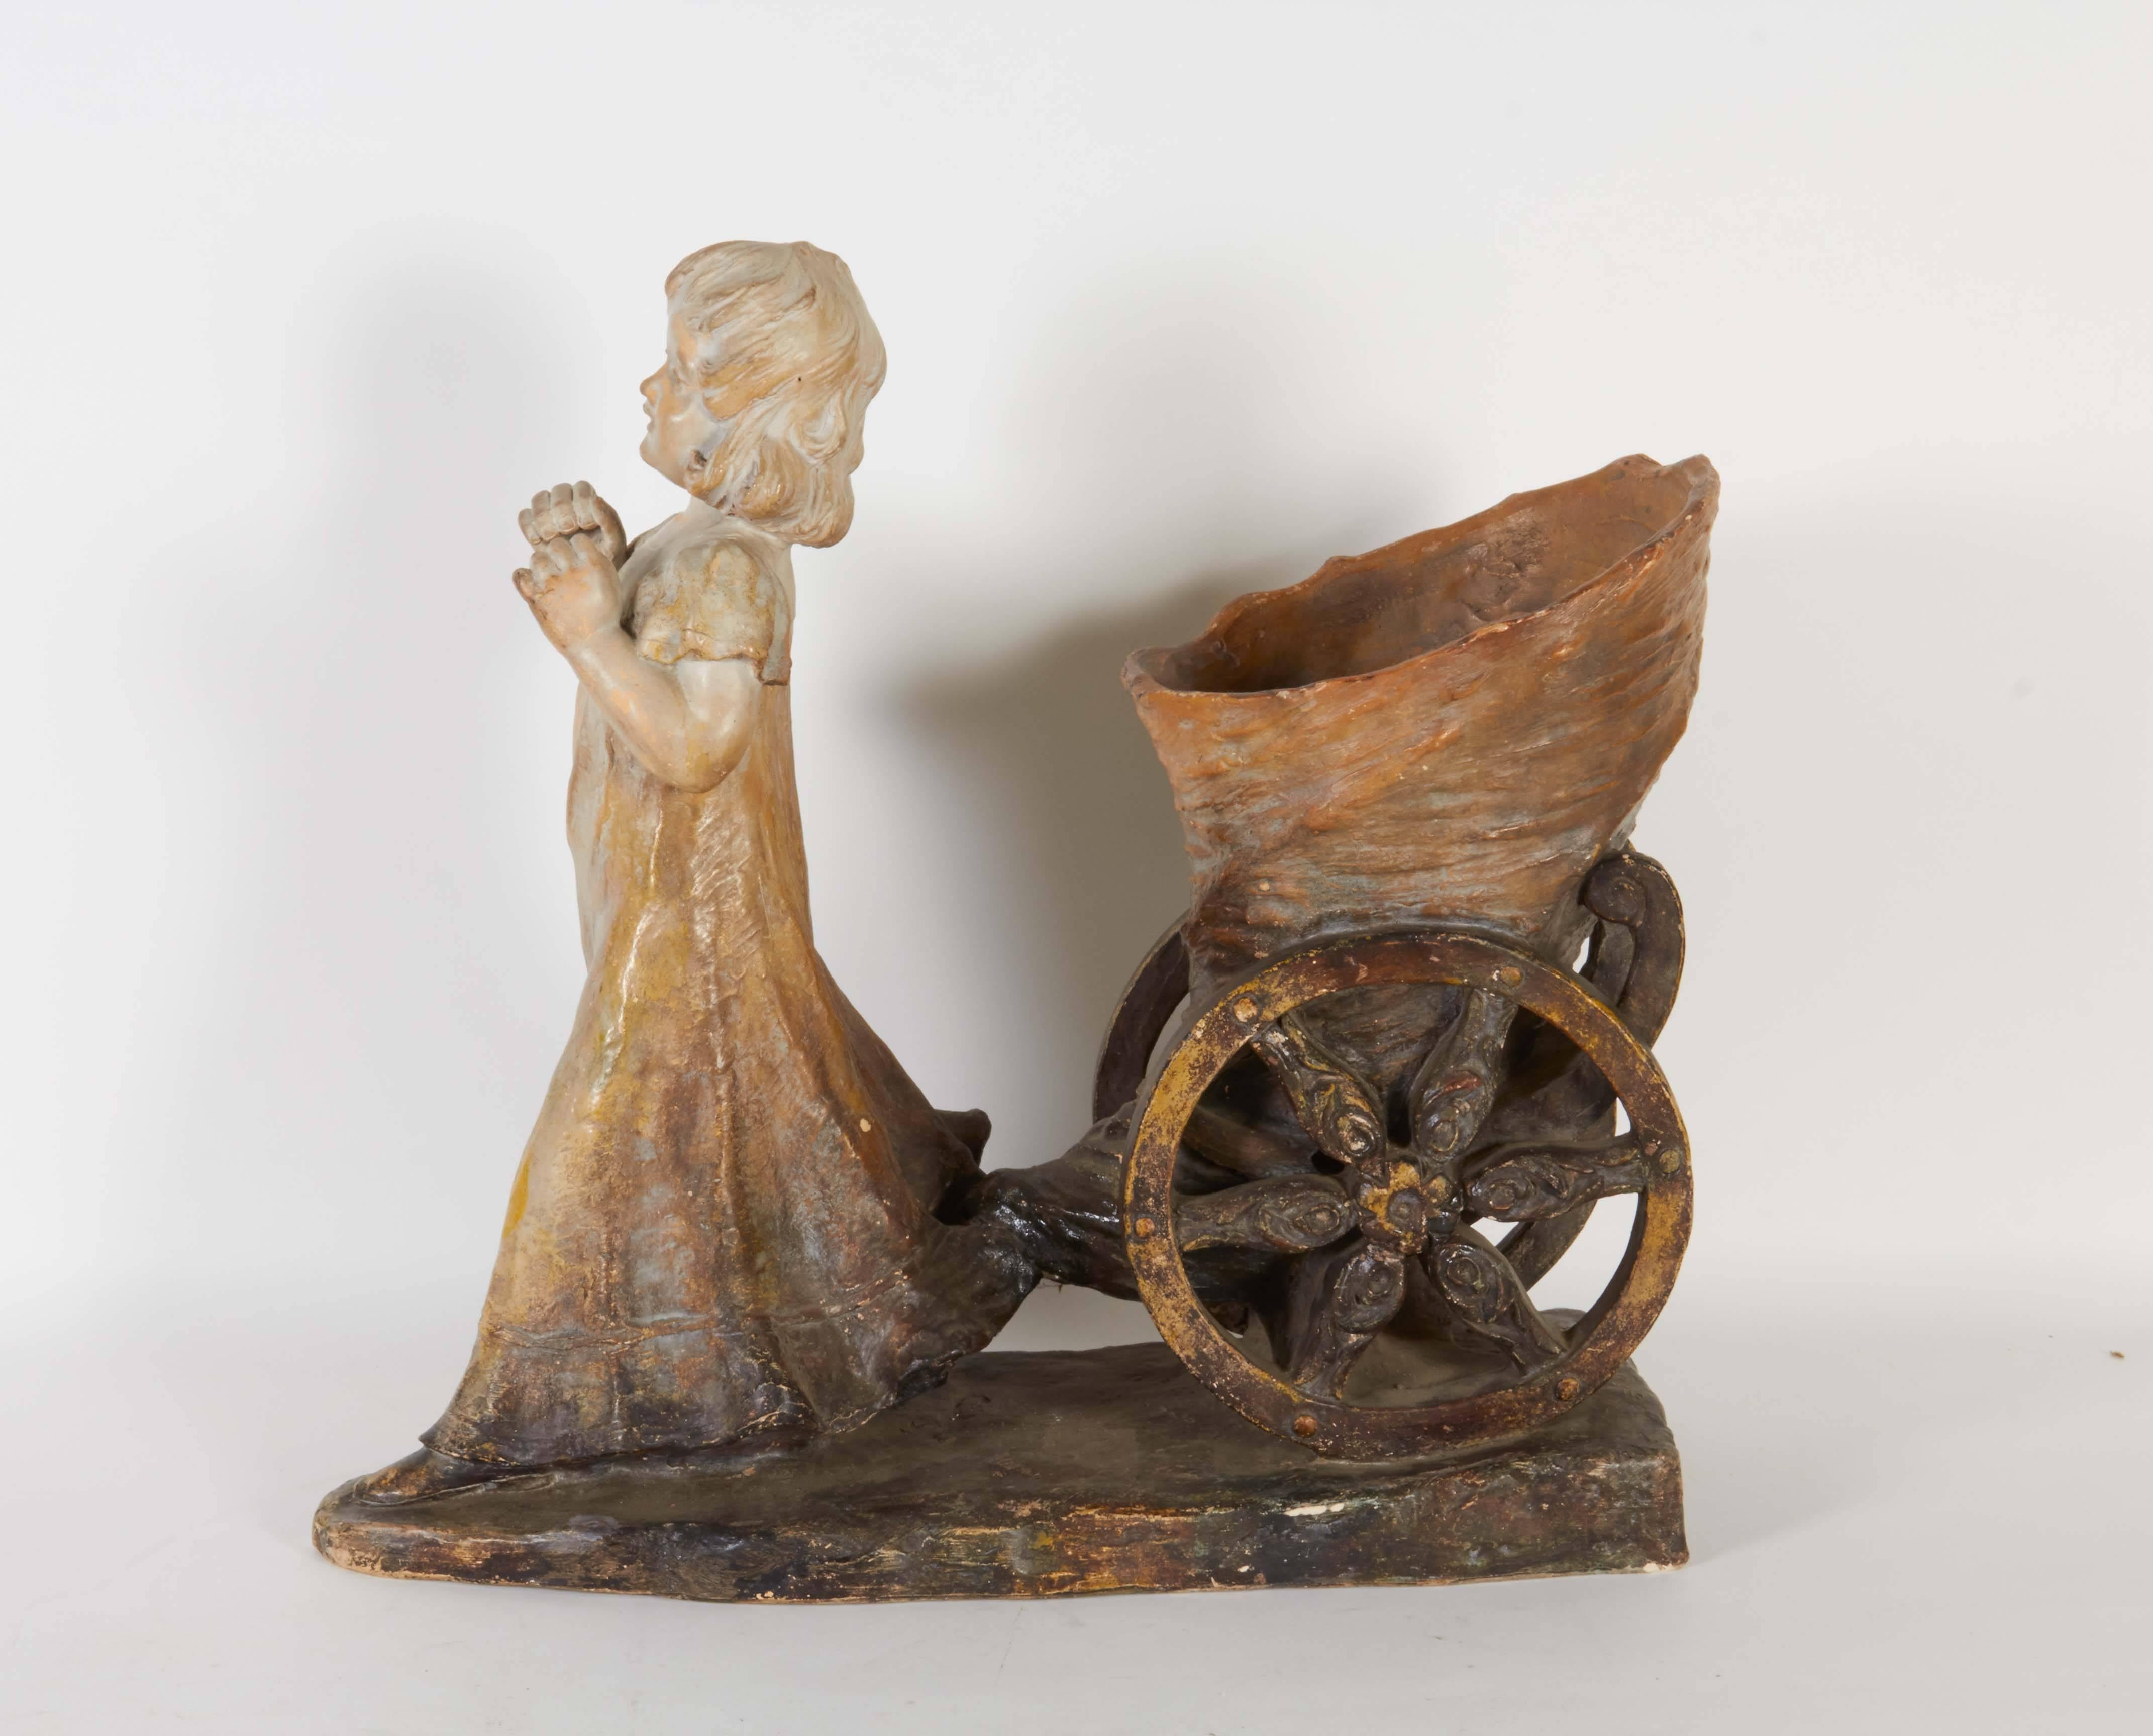 A beautiful terracotta jardiniere planter, produced in Austria within the early 1900s, depicting a sculpture of a young girl pulling a cornucopia on spoke wheels. Markings include [Made in Austria], number [300] and maker's name (albeit illegible)